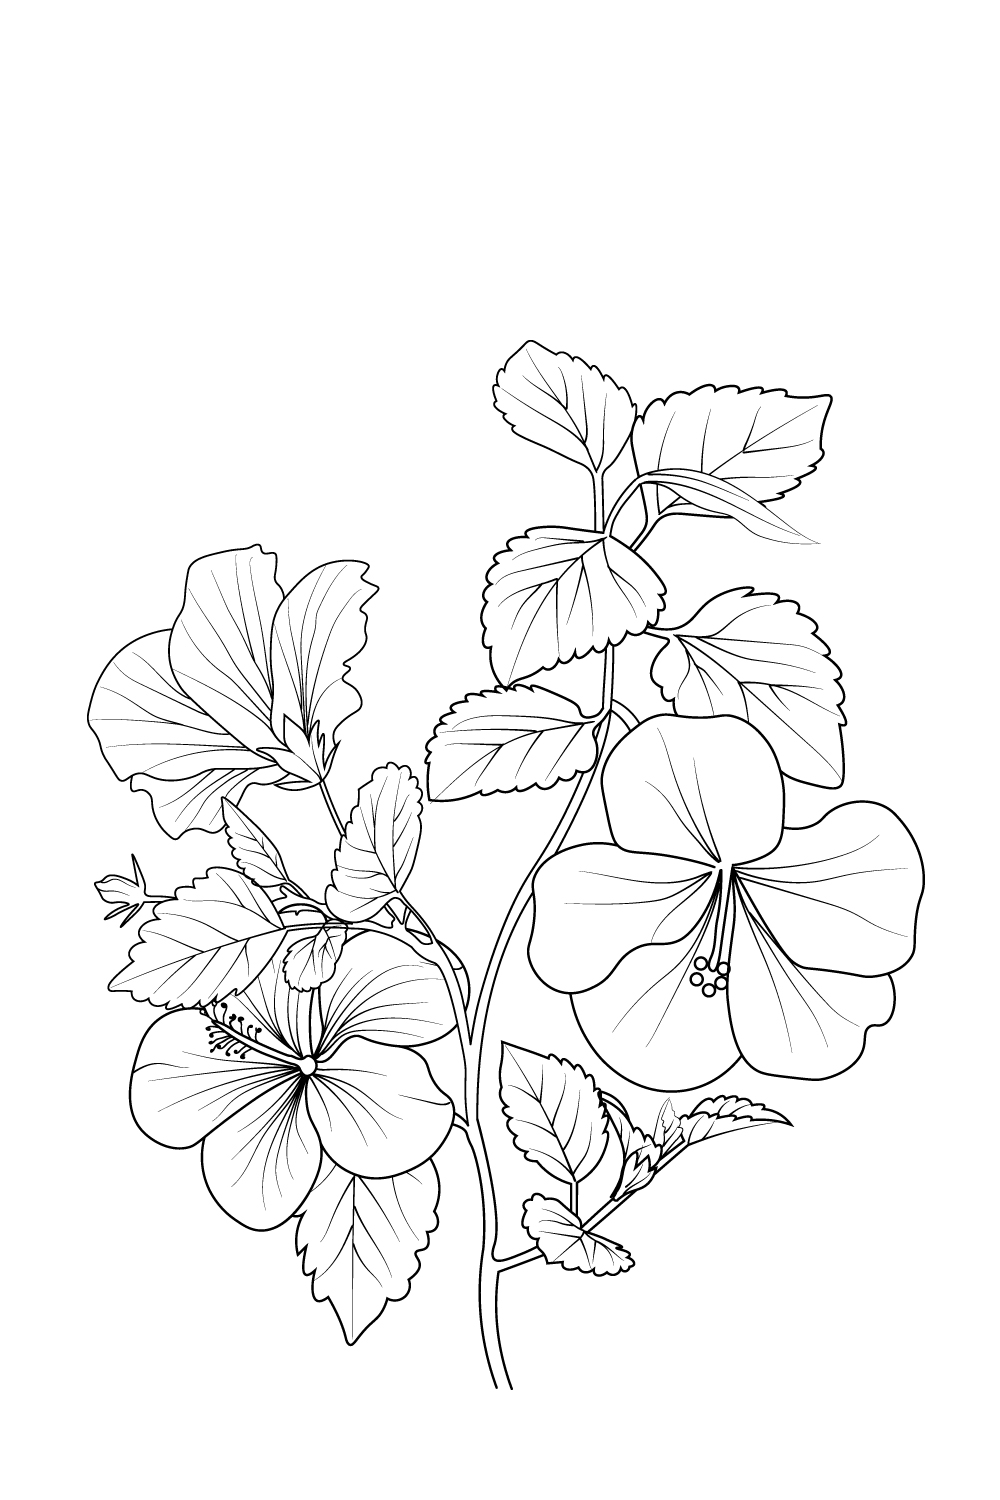 Hibiscus flower drawing Black and White Stock Photos & Images - Alamy